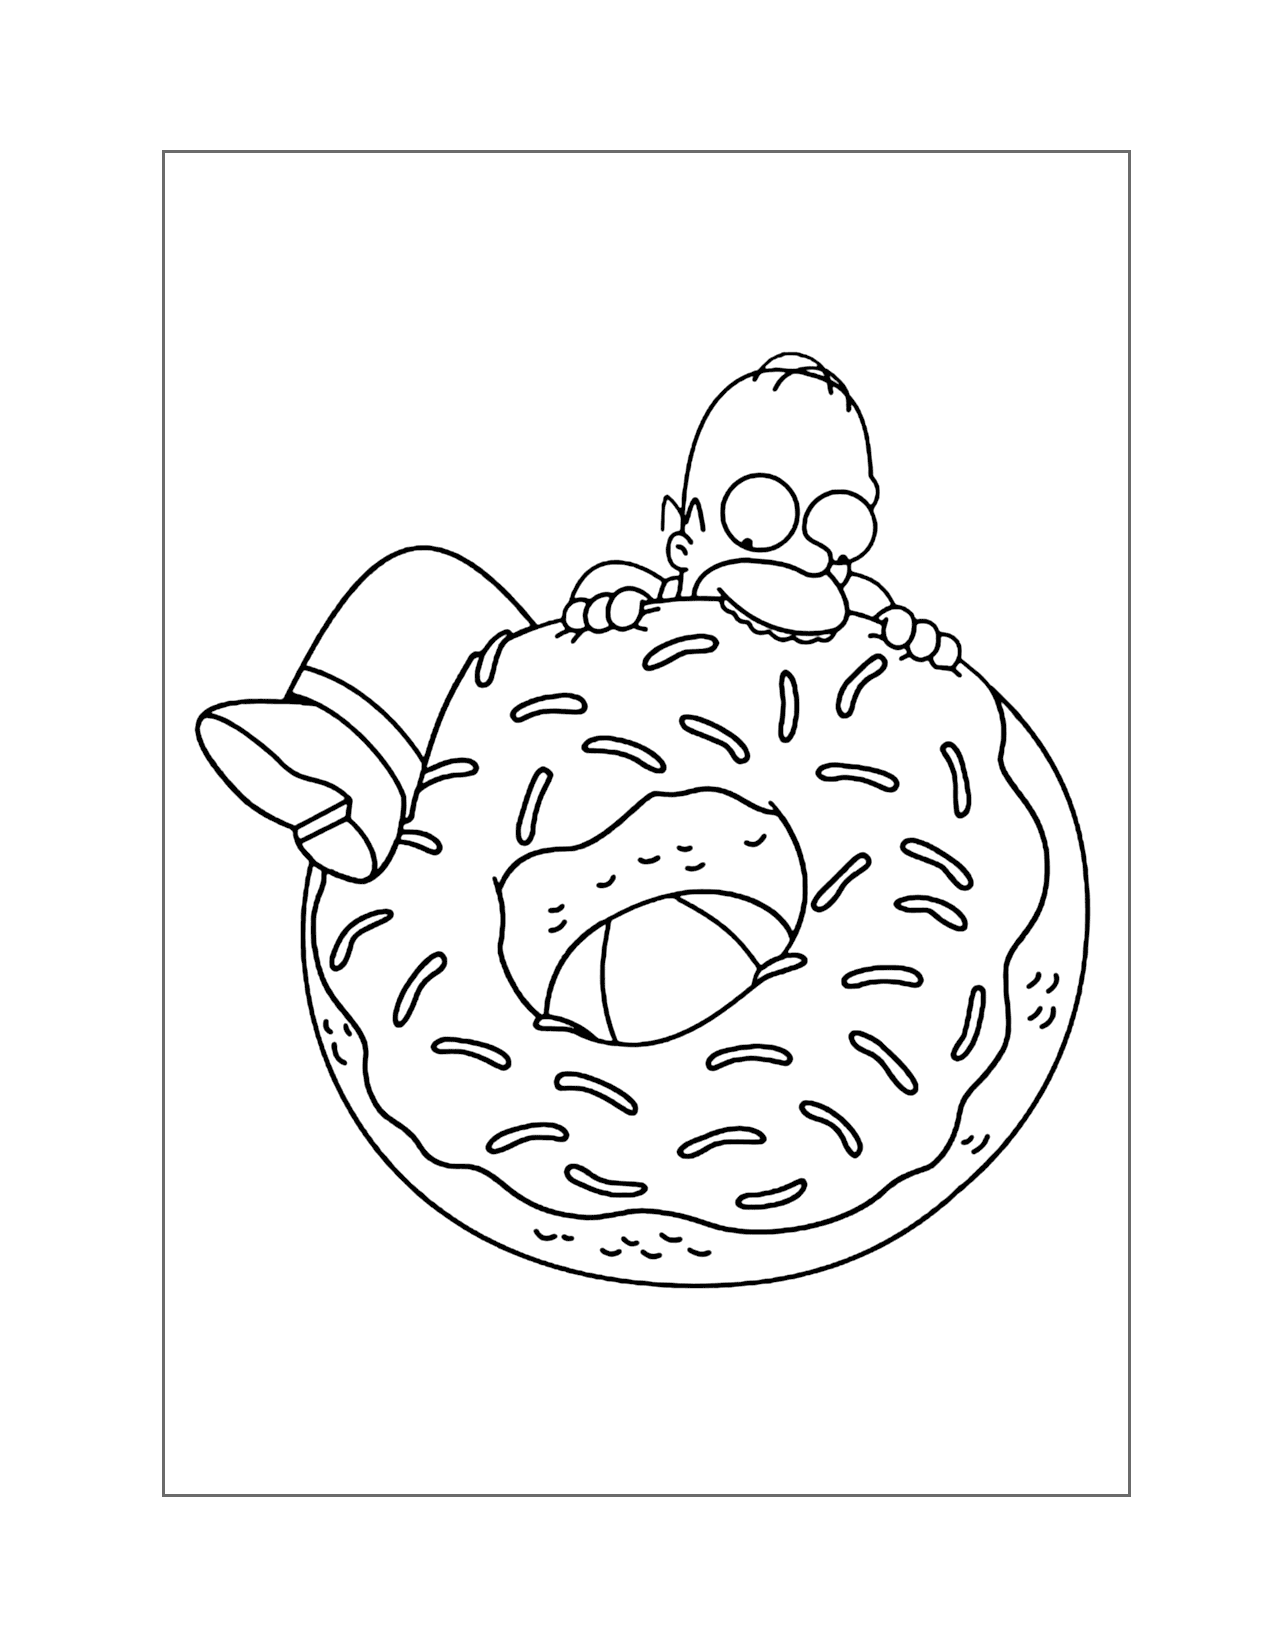 Homer Simpson Eating A Big Donut Coloring Page